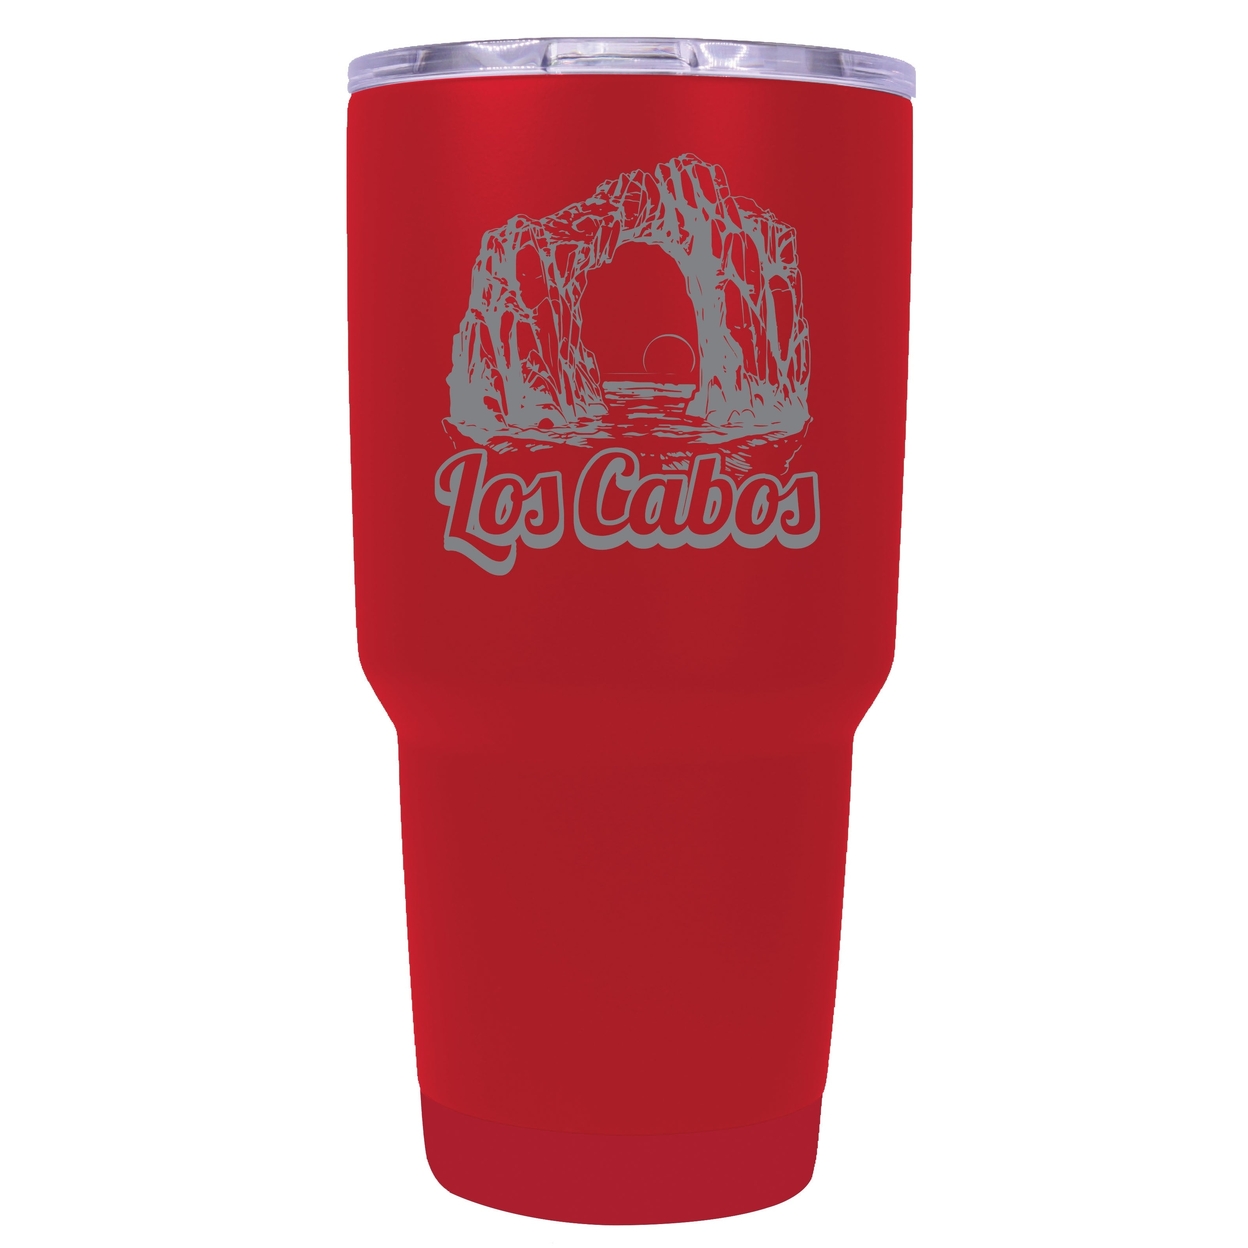 Los Cabos Mexico Souvenir 24 Oz Engraved Insulated Stainless Steel Tumbler - Seafoam,,Single Unit